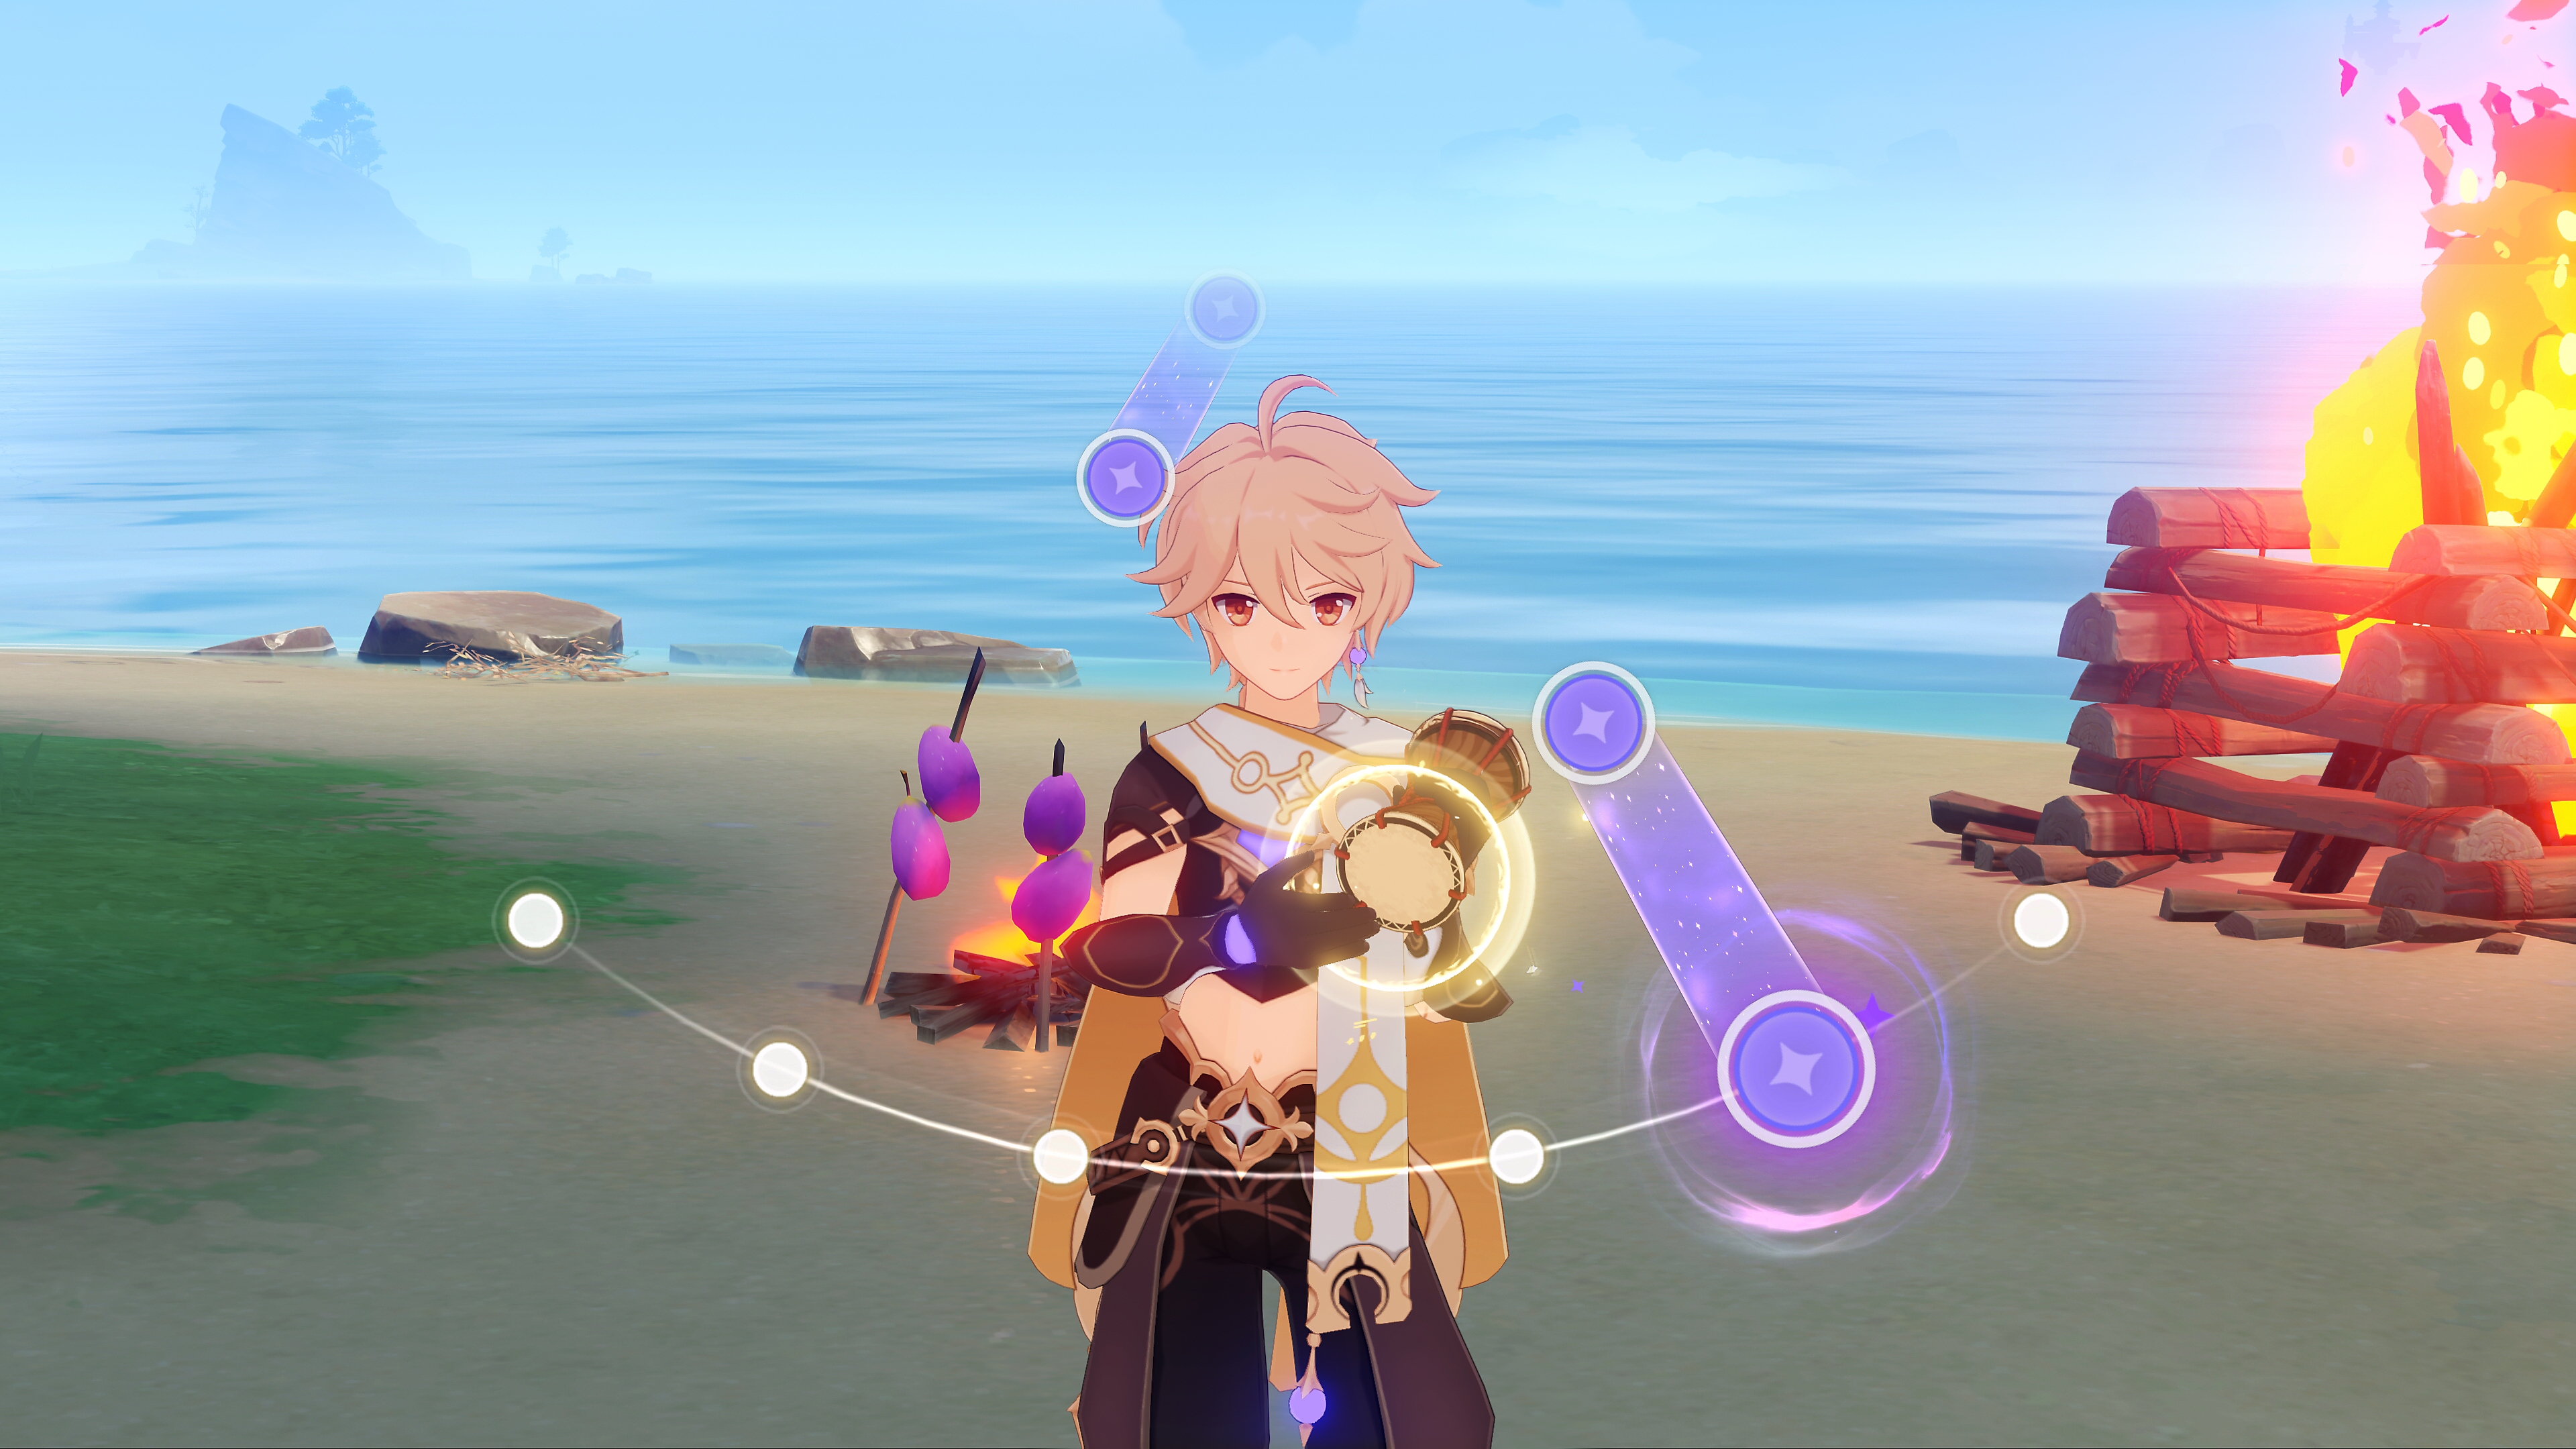 Genshin Impact: 2.7 update screenshot showing a character with the ocean in the background